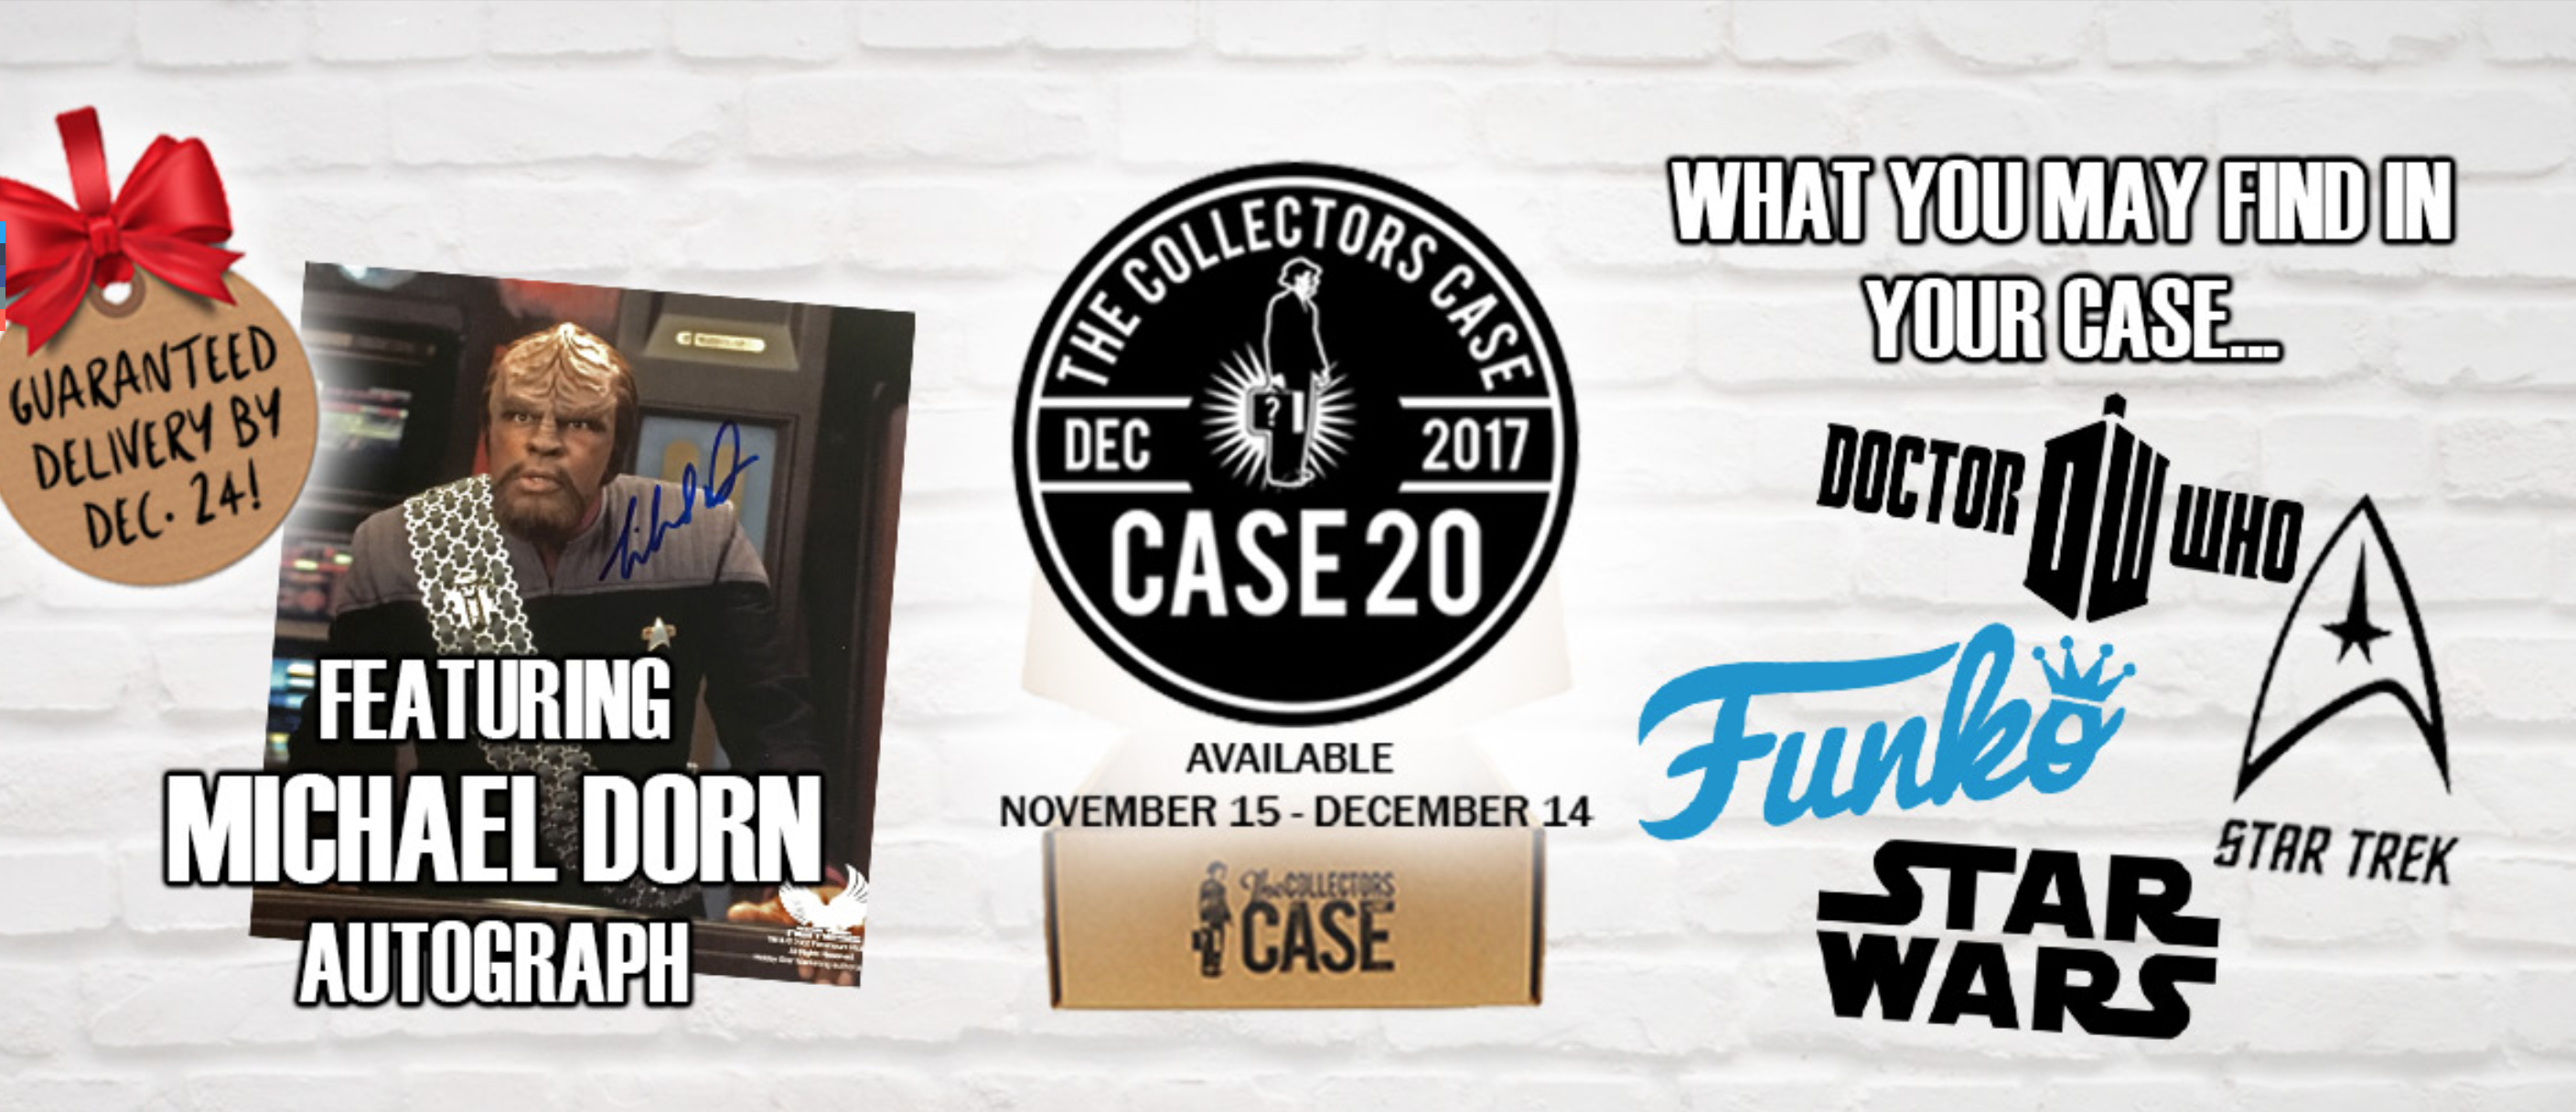 The Collector’s Case December 2017 Spoilers!